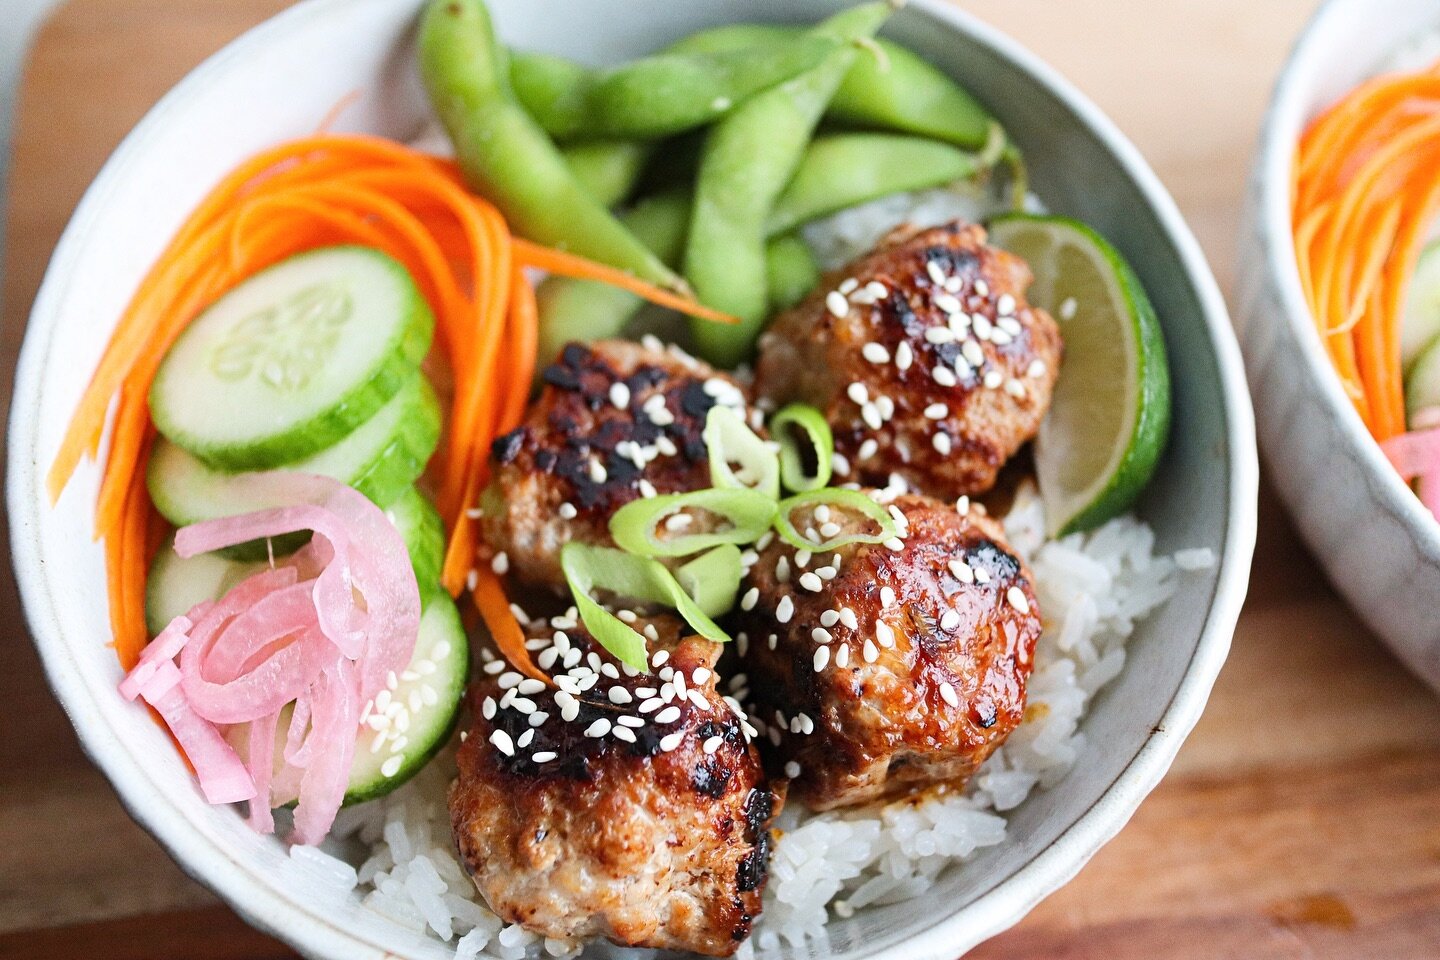 Dinner tonight was ready in 30 mins and a bit of a mish-mash of ingredients I needed to use up: 
Vietnamese meatballs w rice, edamame, carrot, cucumber &amp; pickled onions 🧅🍚🥕🥒
Recipe in my FB group 😊